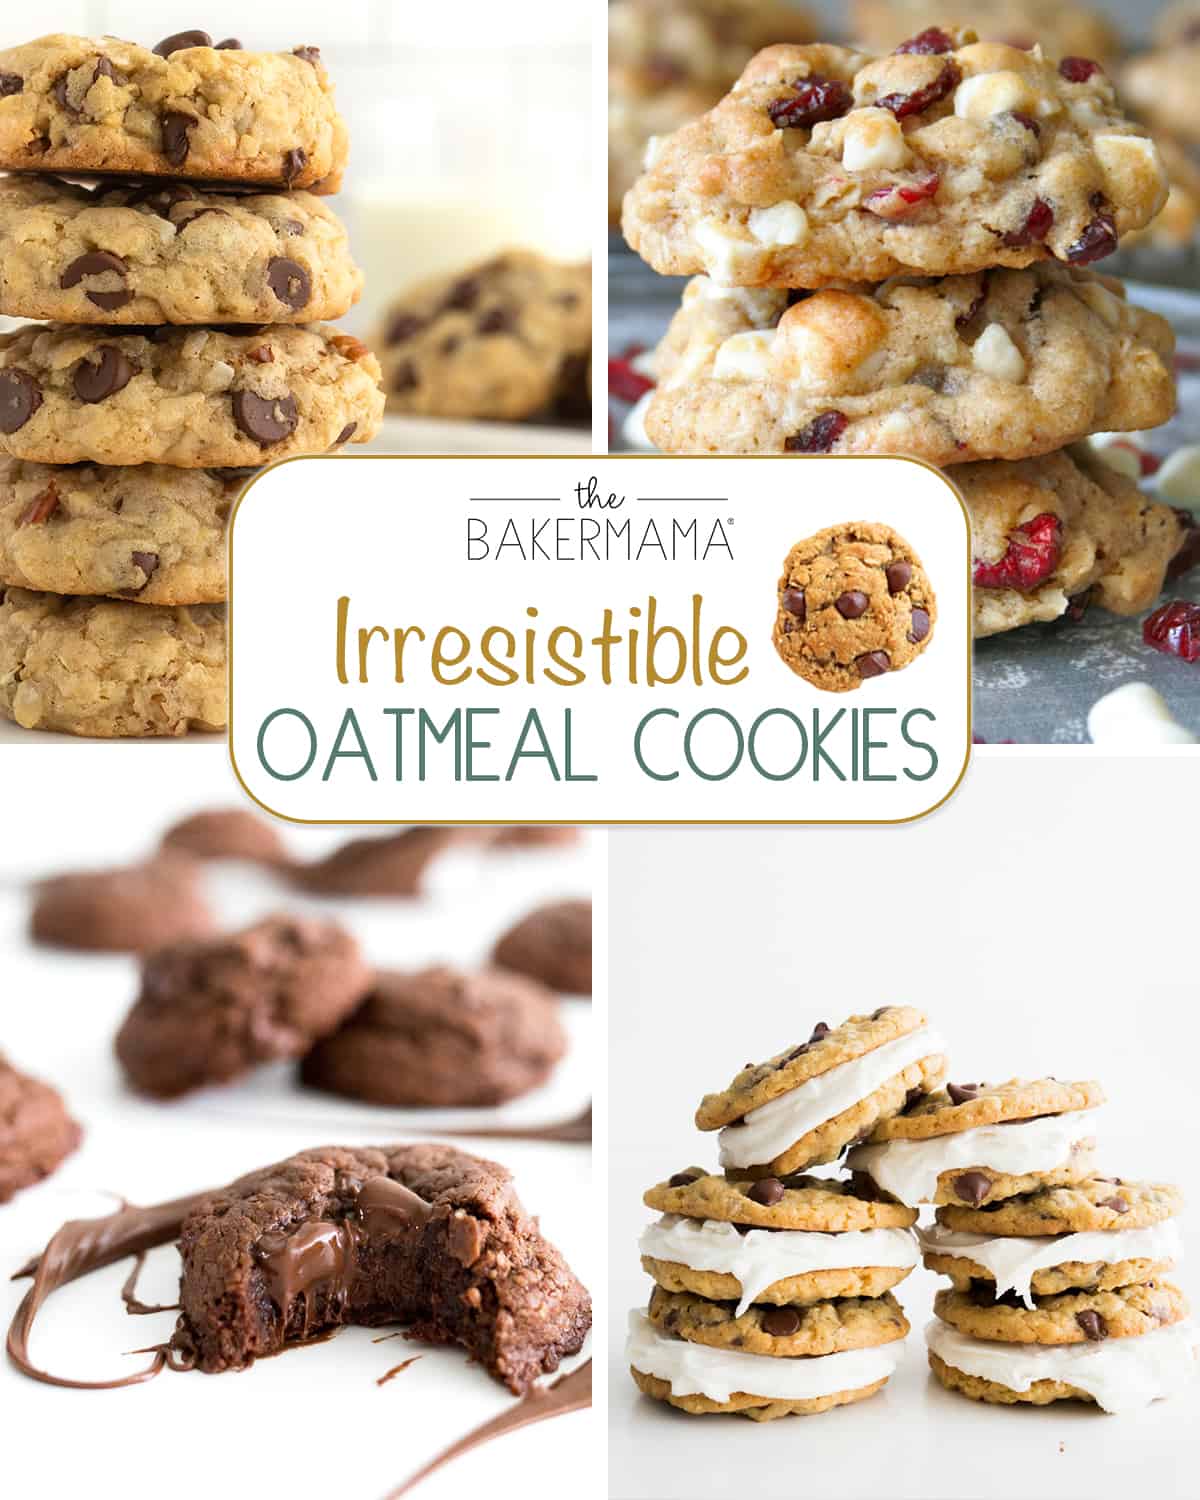 Irresistible Oatmeal Cookie Recipes by The BakerMama